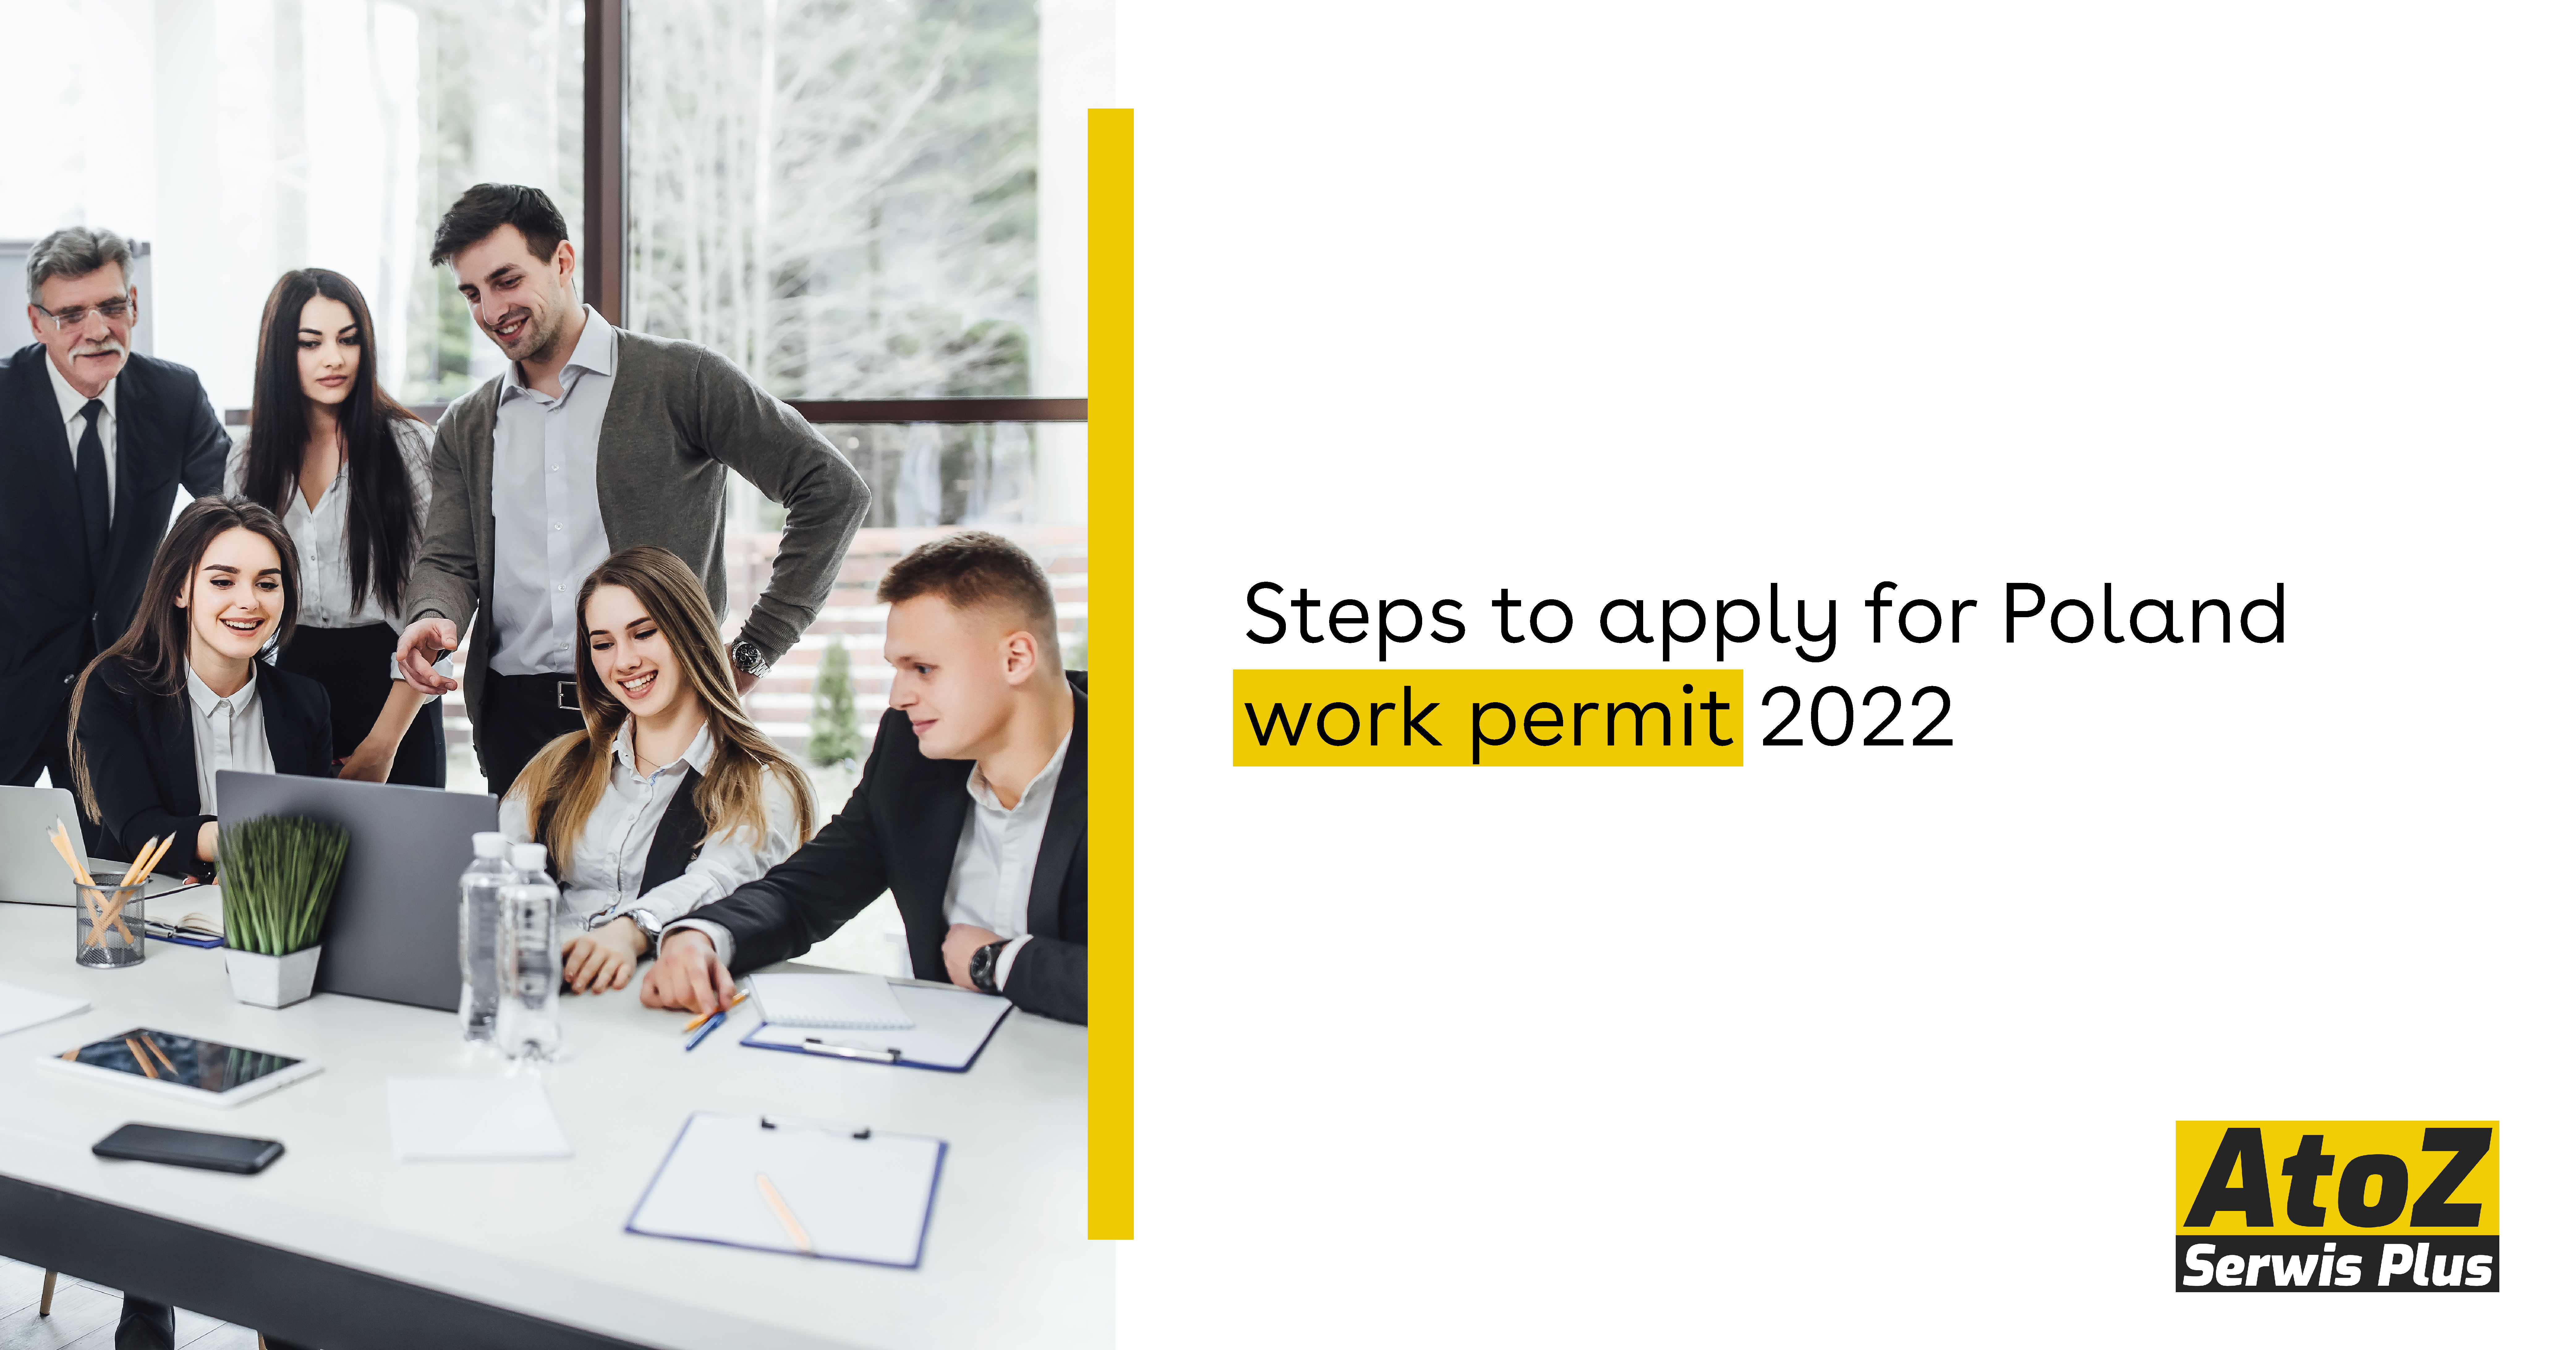 steps-to-apply-for-poland-work-permit-2022